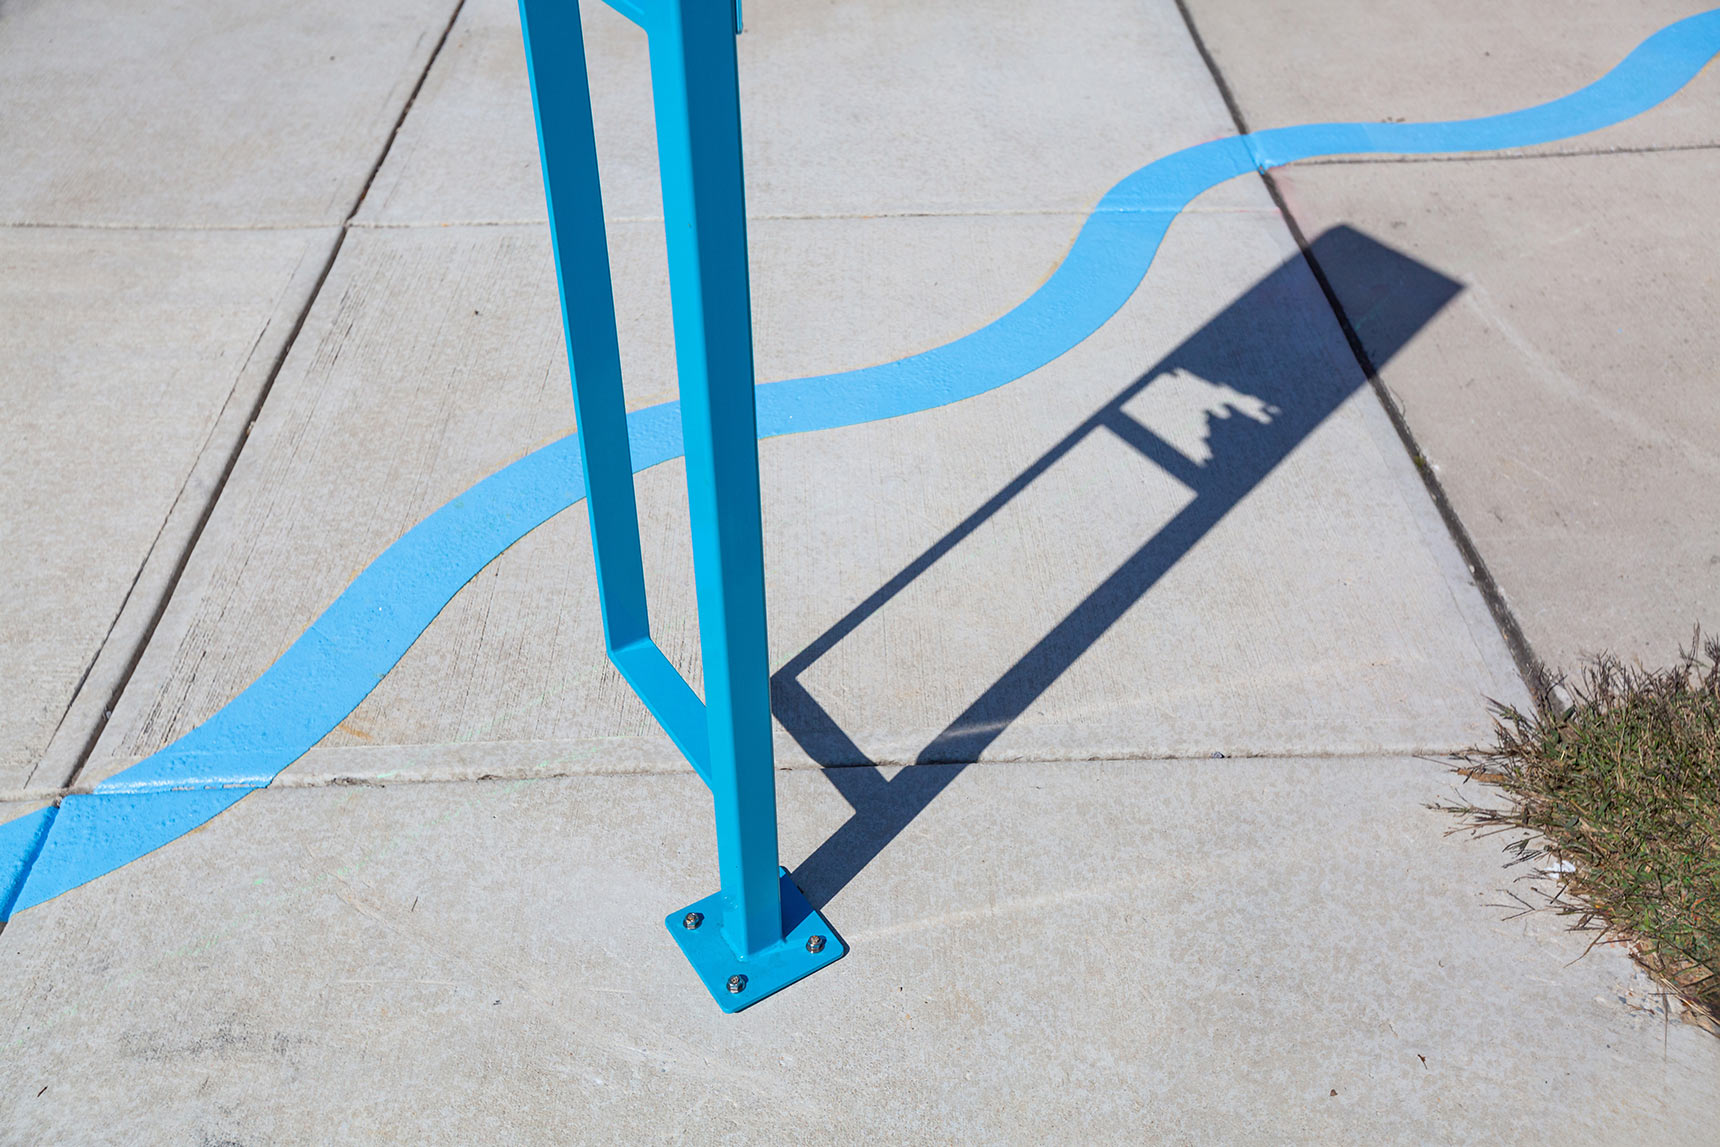 Detail photo of a public art installation mapping the path of an underground stream. A bright blue wavy line snakes across a sidewalk behind the distinctive shadow of a sculptural interpretive sign.